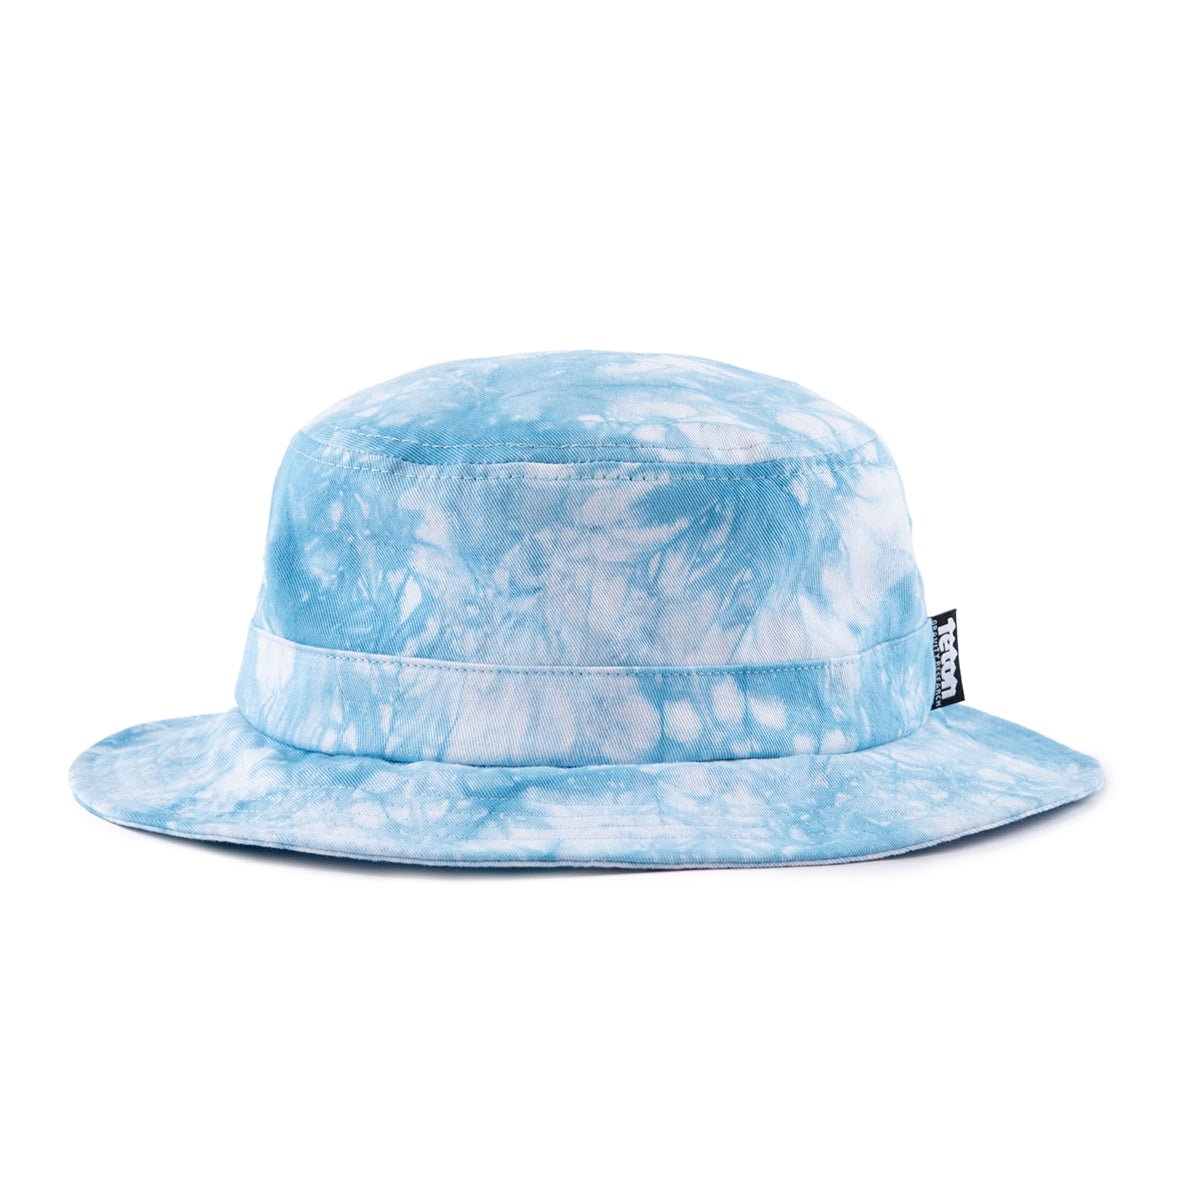 Grateful Dead x TGR Steal Your Face Bucket Hat - Teton Gravity Research